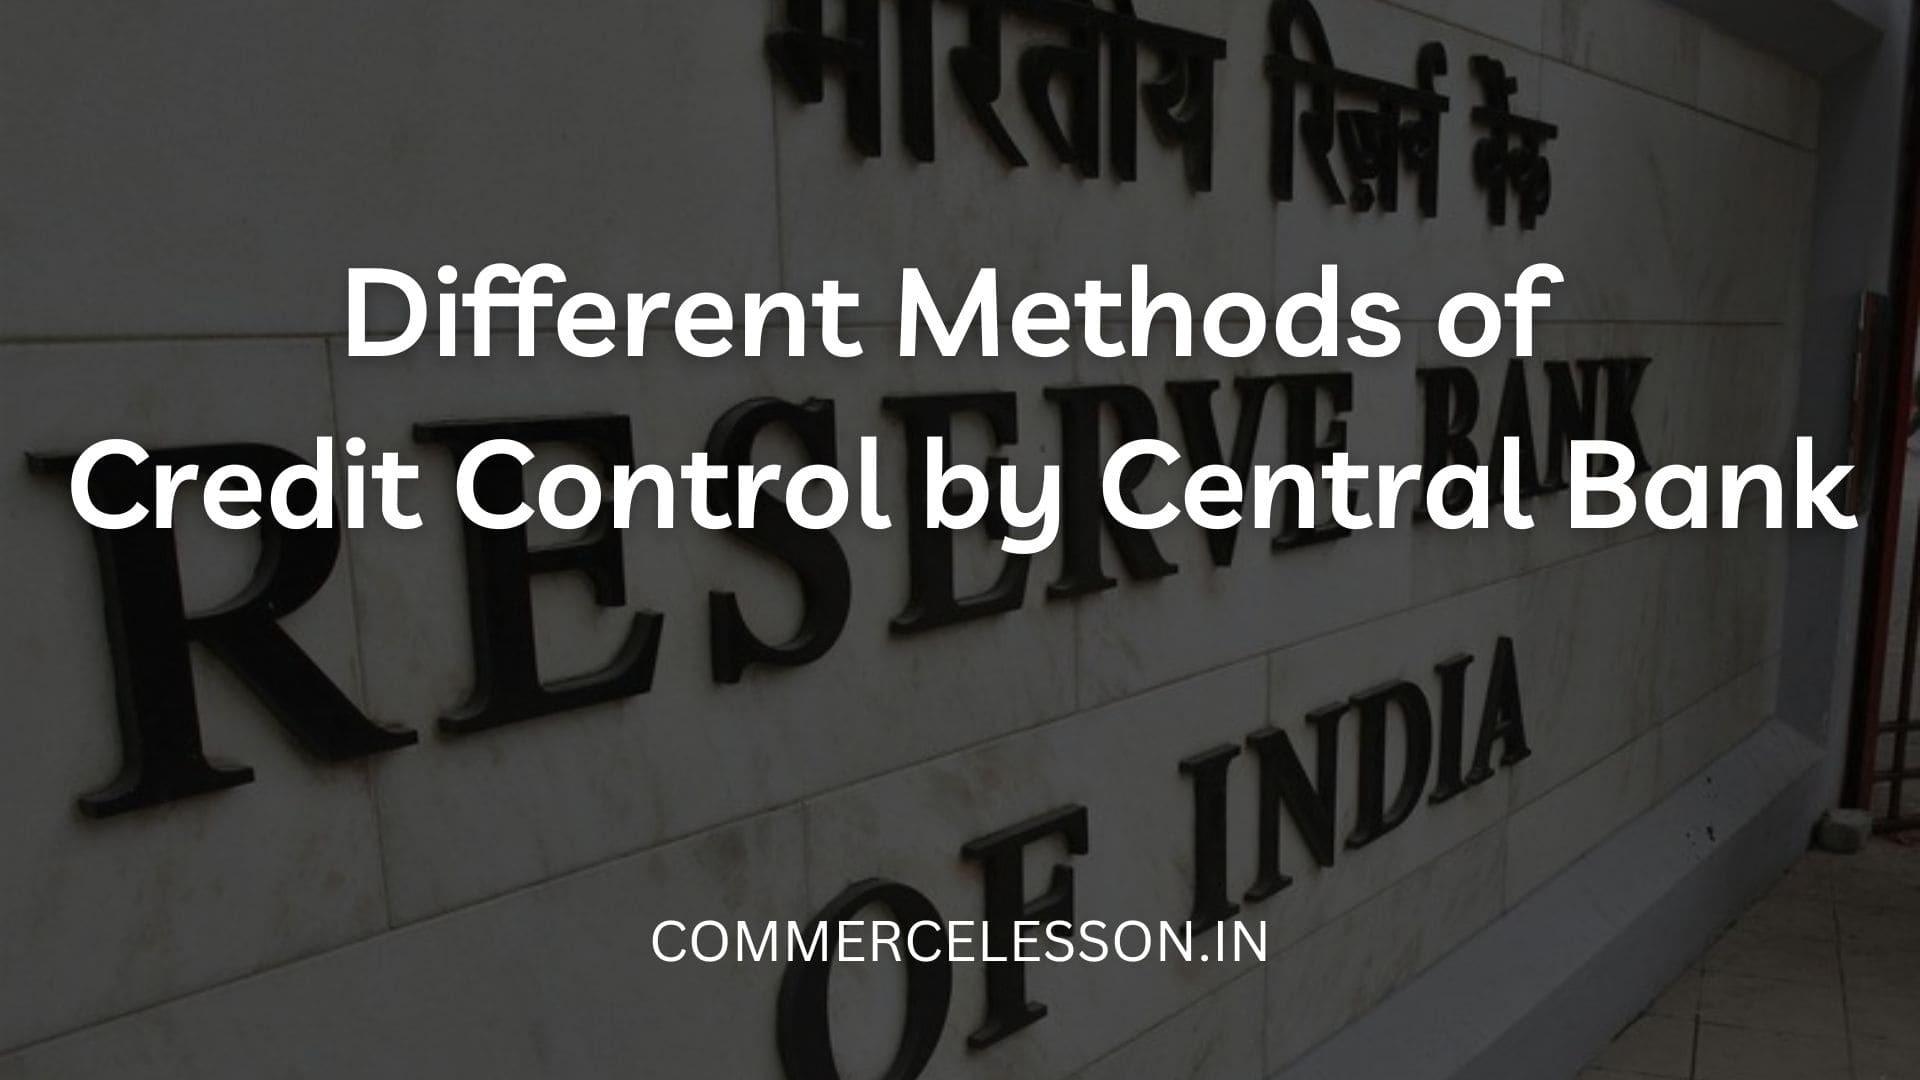 Different Methods of Credit Control by Central Bank